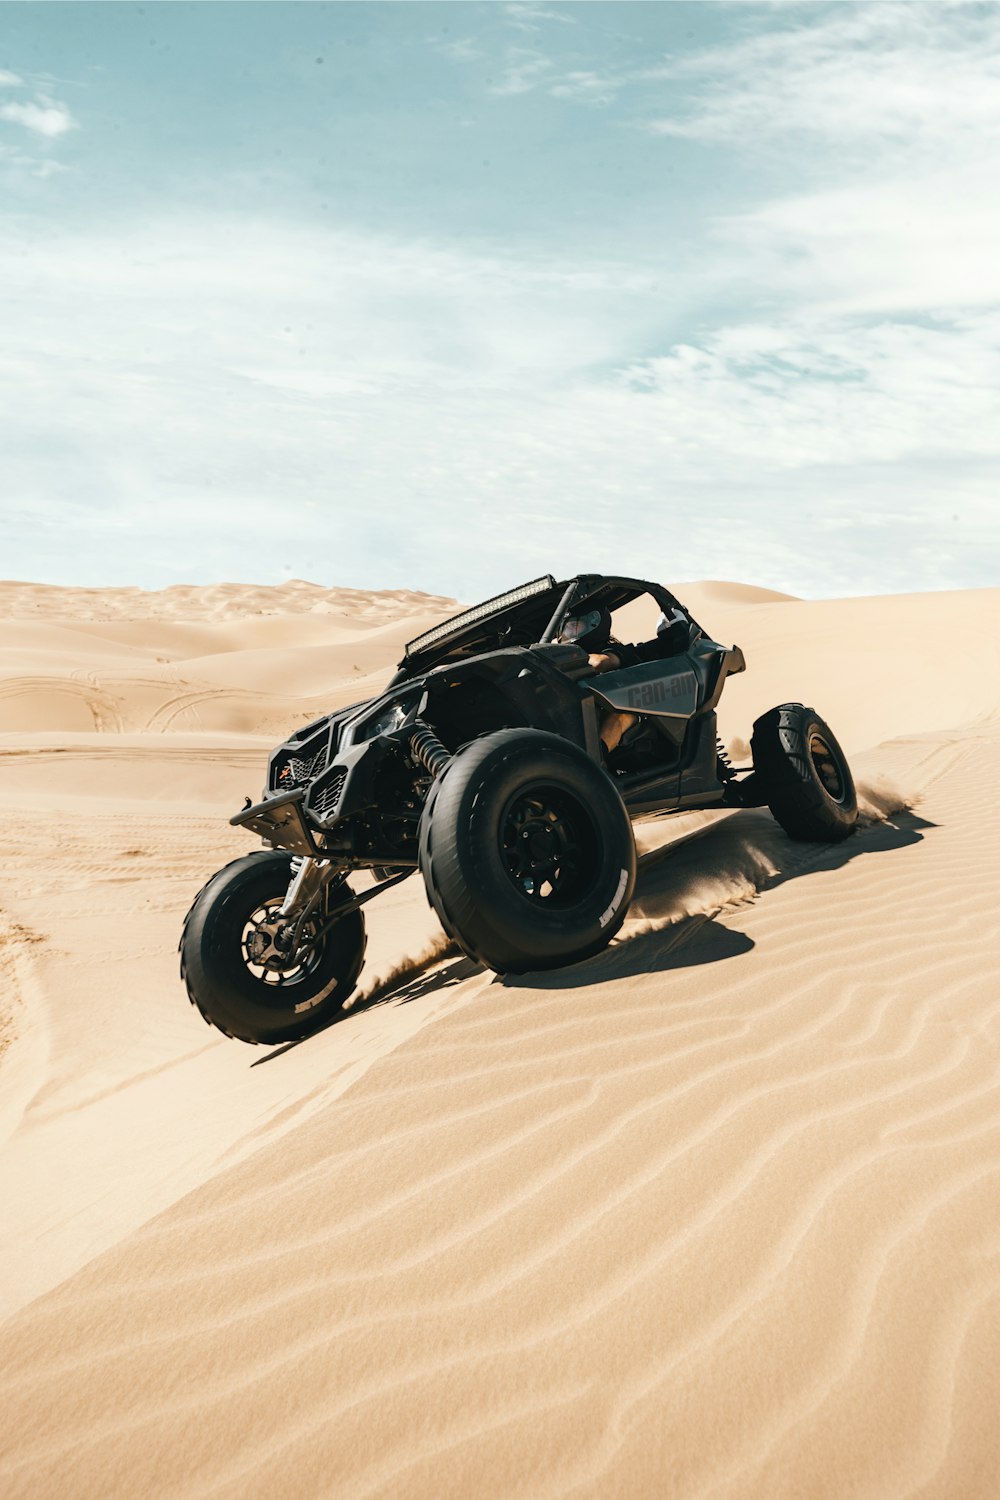 black and gray sports bike on brown sand